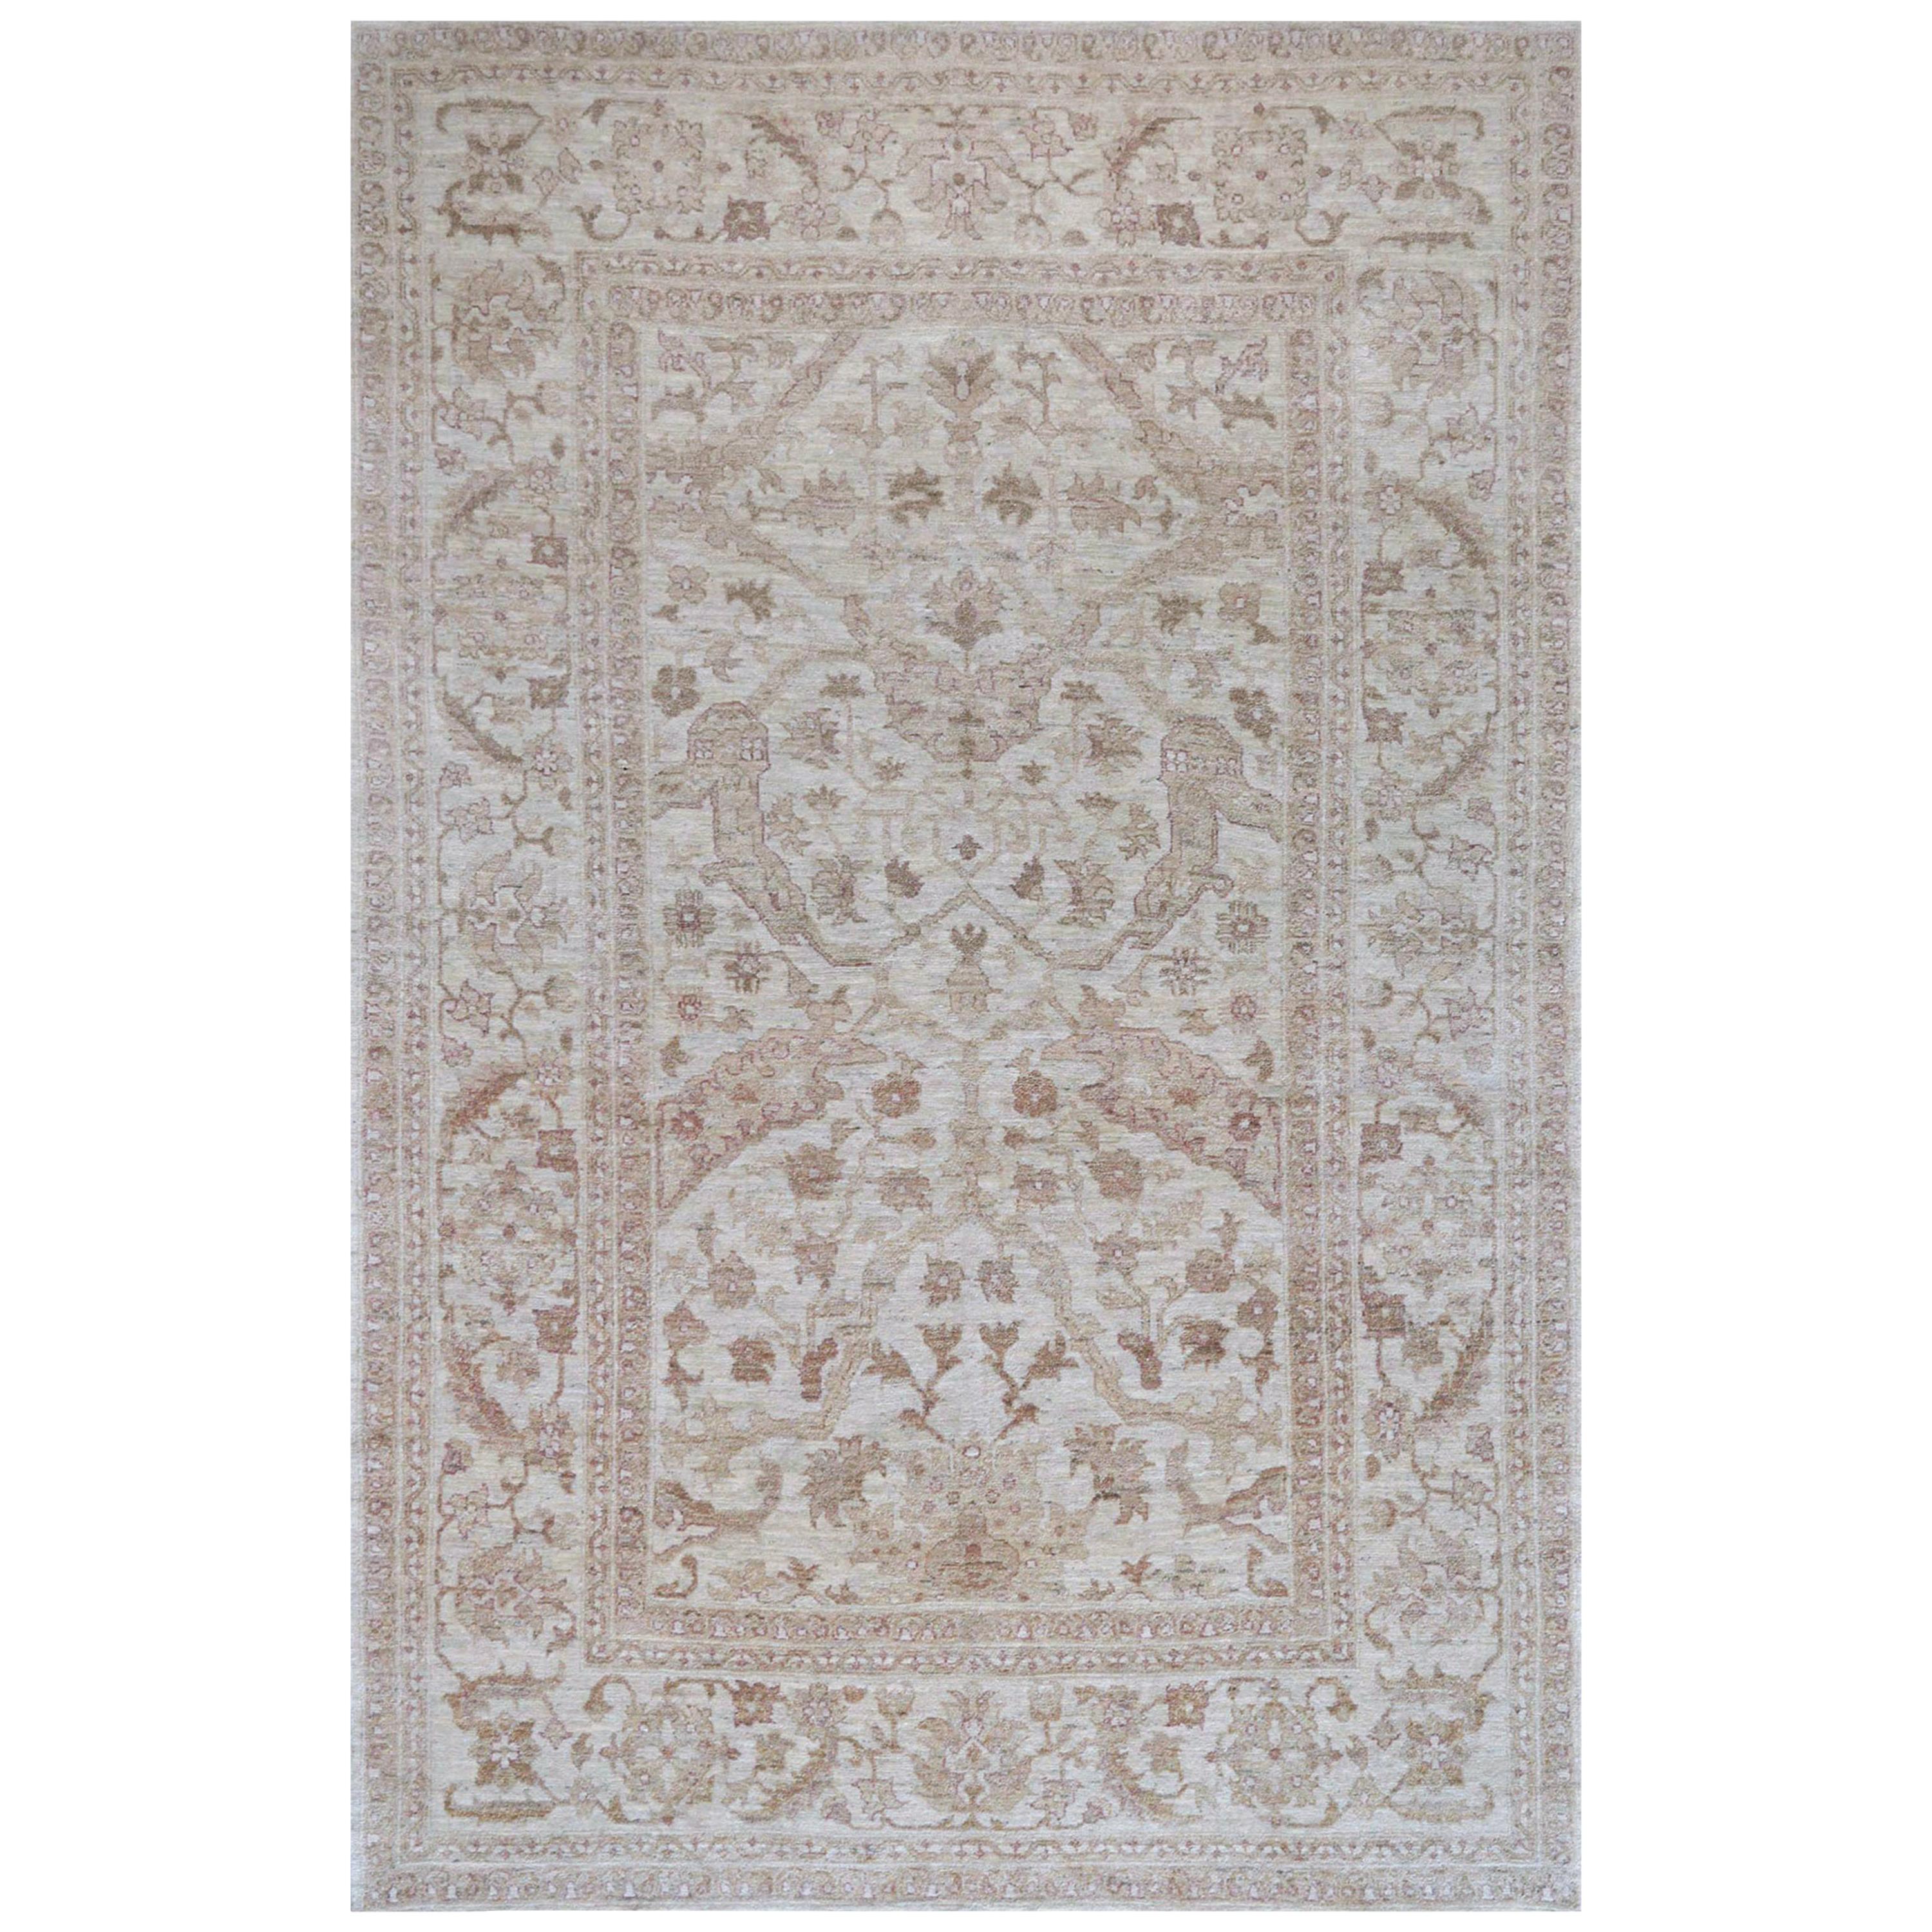 Quality Hand-Knotted Wool Revival Agra Rug